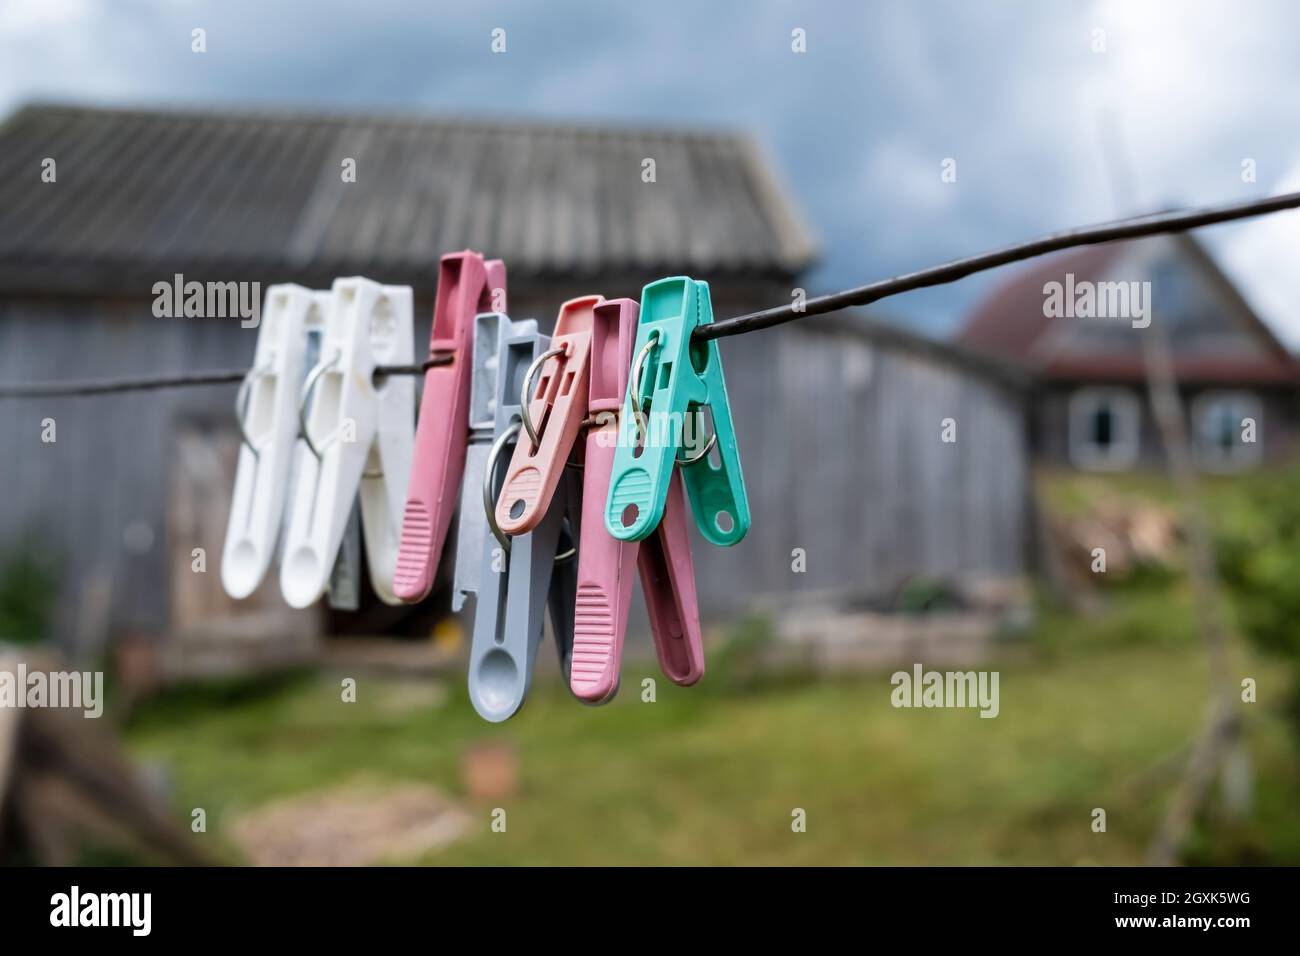 Plastic clothespins hang on clotheslines, in a rustic courtyard, against the backdrop of a wooden barn and the sky. Stock Photo